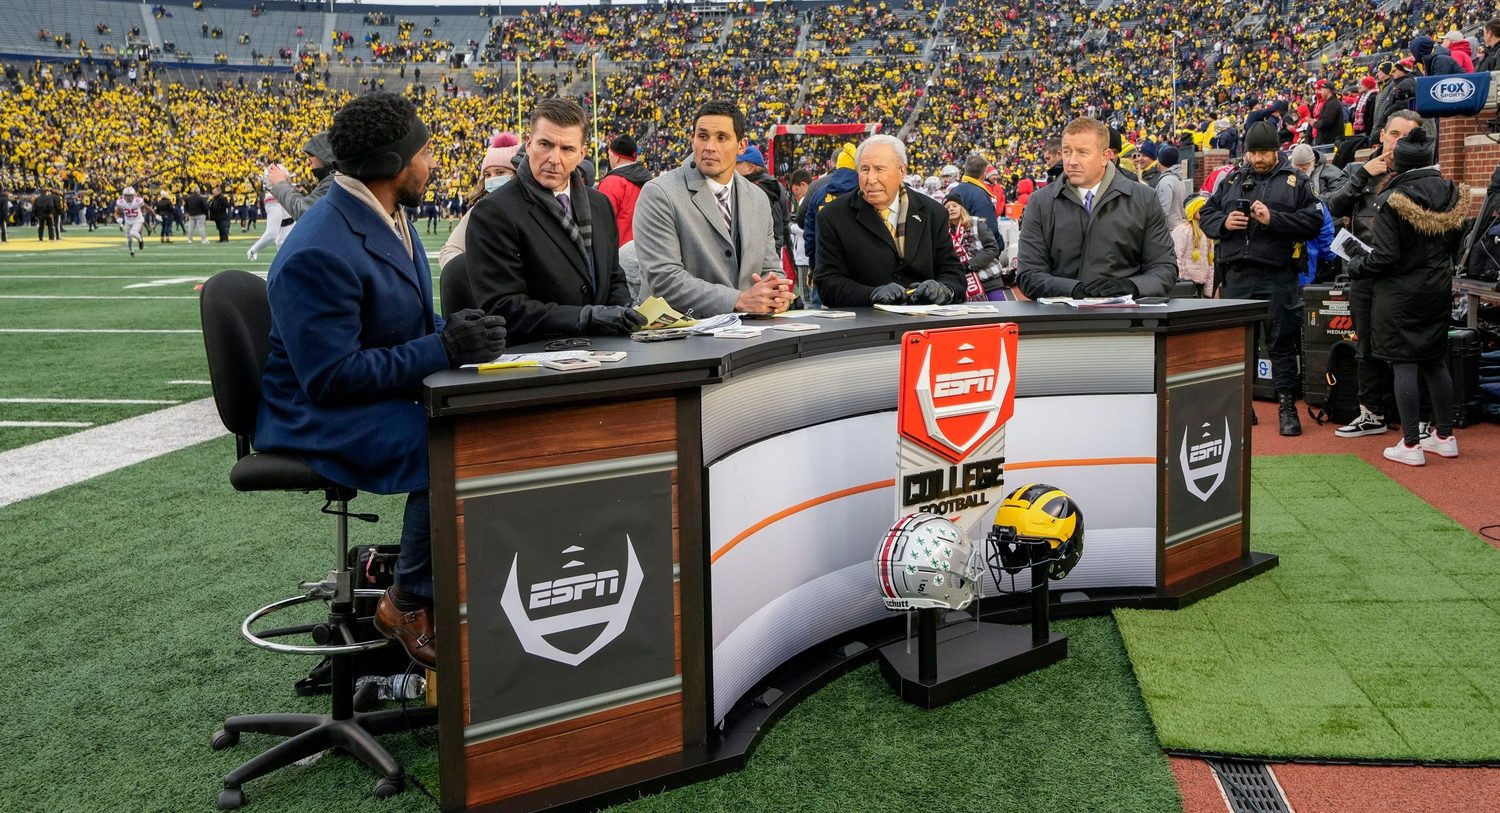 ESPN College GameDay broadcasts from the field prior to the NCAA football game between the Michigan Wolverines and the Ohio State Buckeyes at Michigan Stadium in Ann Arbor on Monday, Nov. 29, 2021.